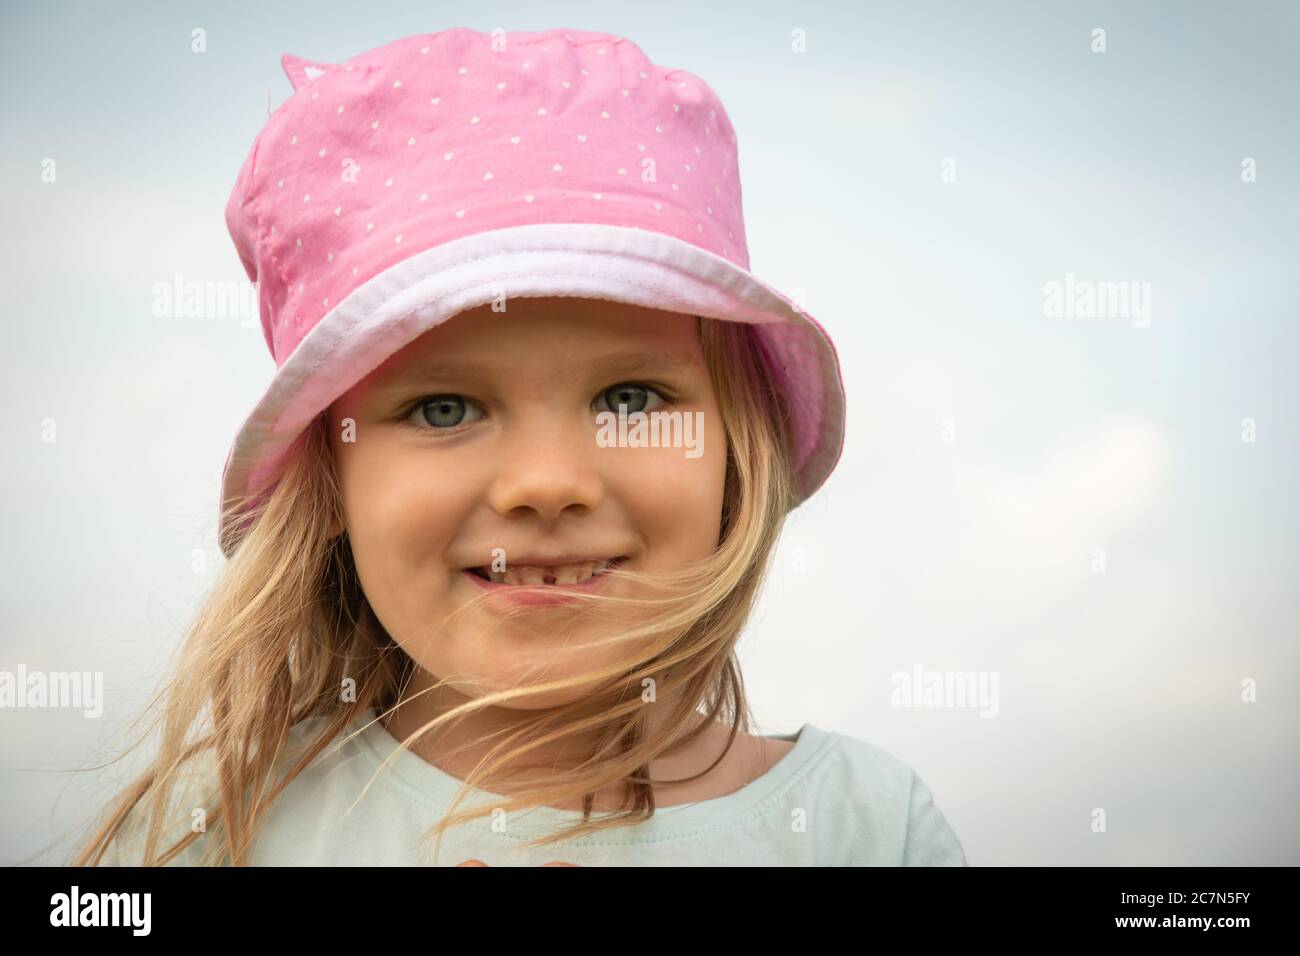 Girl child portrait. Little kid smiling face. Happy adorable and pretty young female head. Joy and happiness expression of caucasian child.  close-up Stock Photo